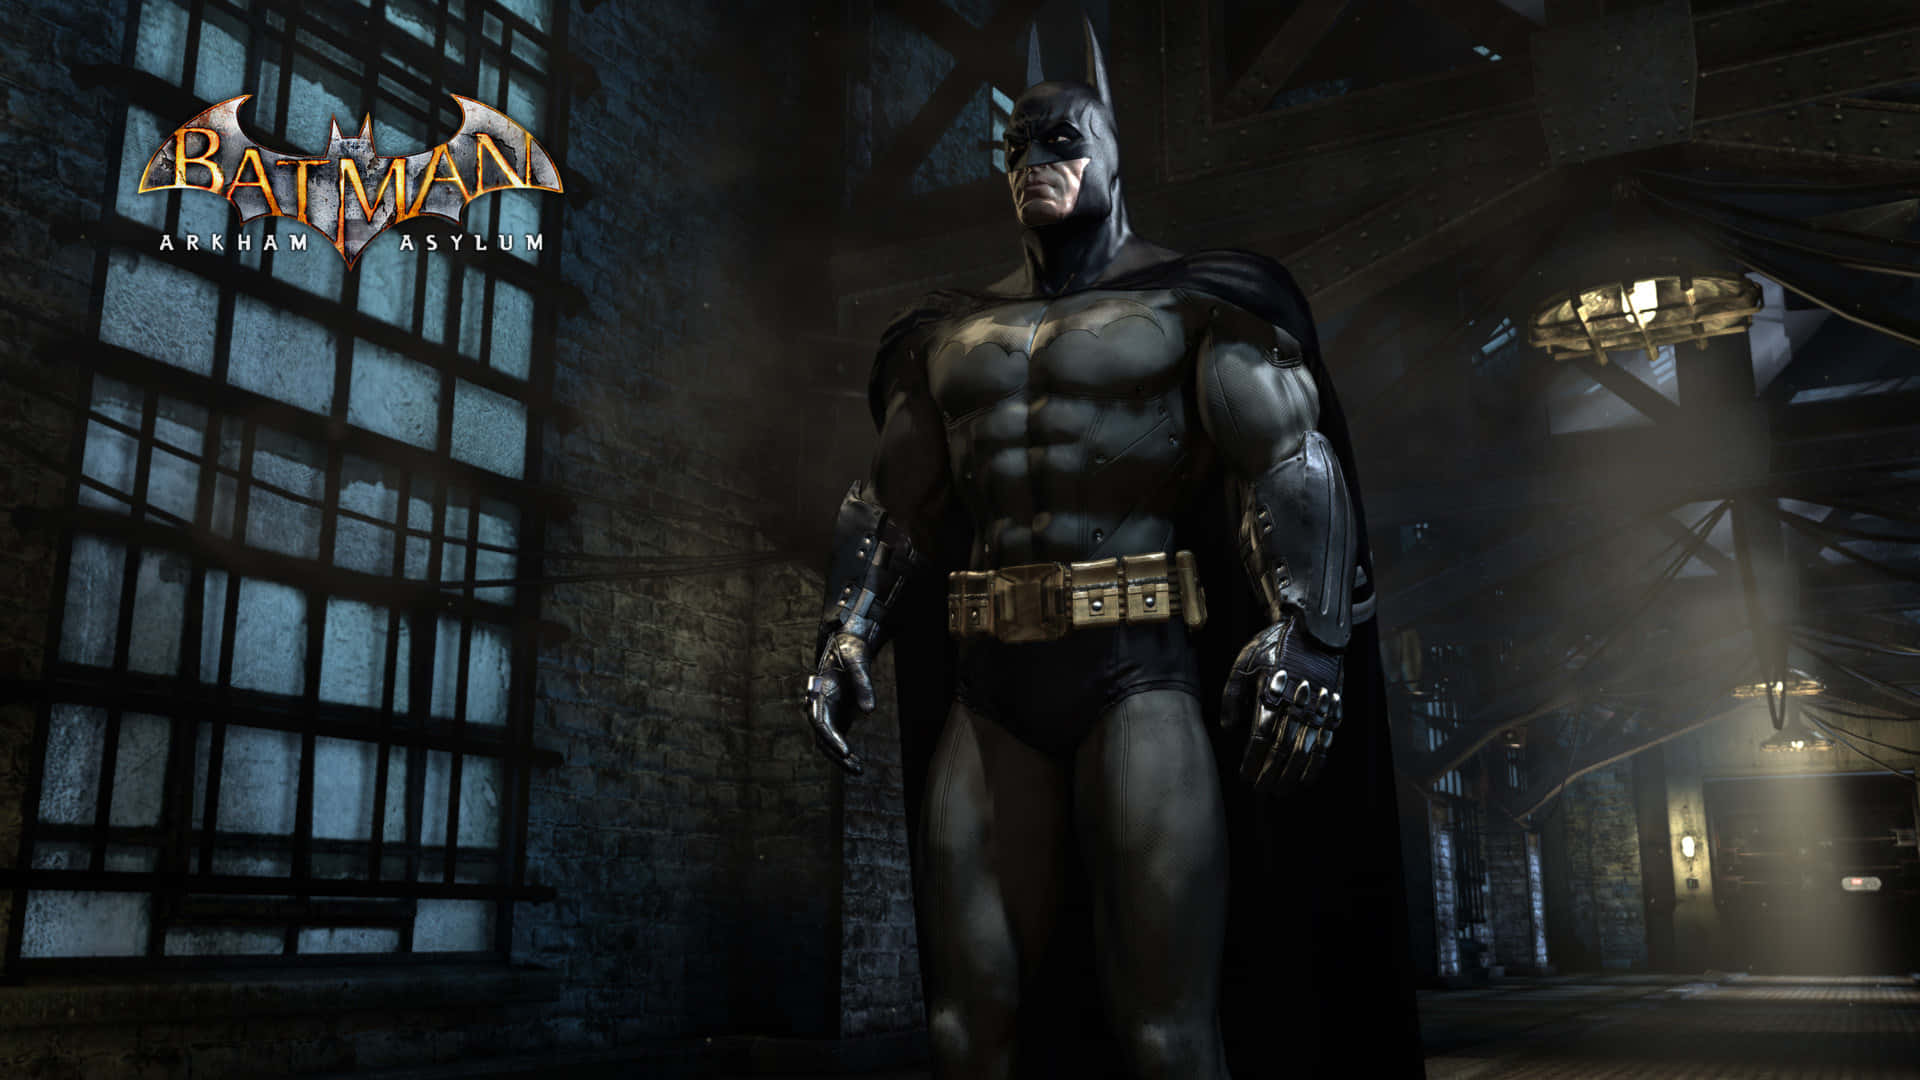 Calling all superheroes! Come arm yourself to save Gotham City from Arkham Asylum. Wallpaper